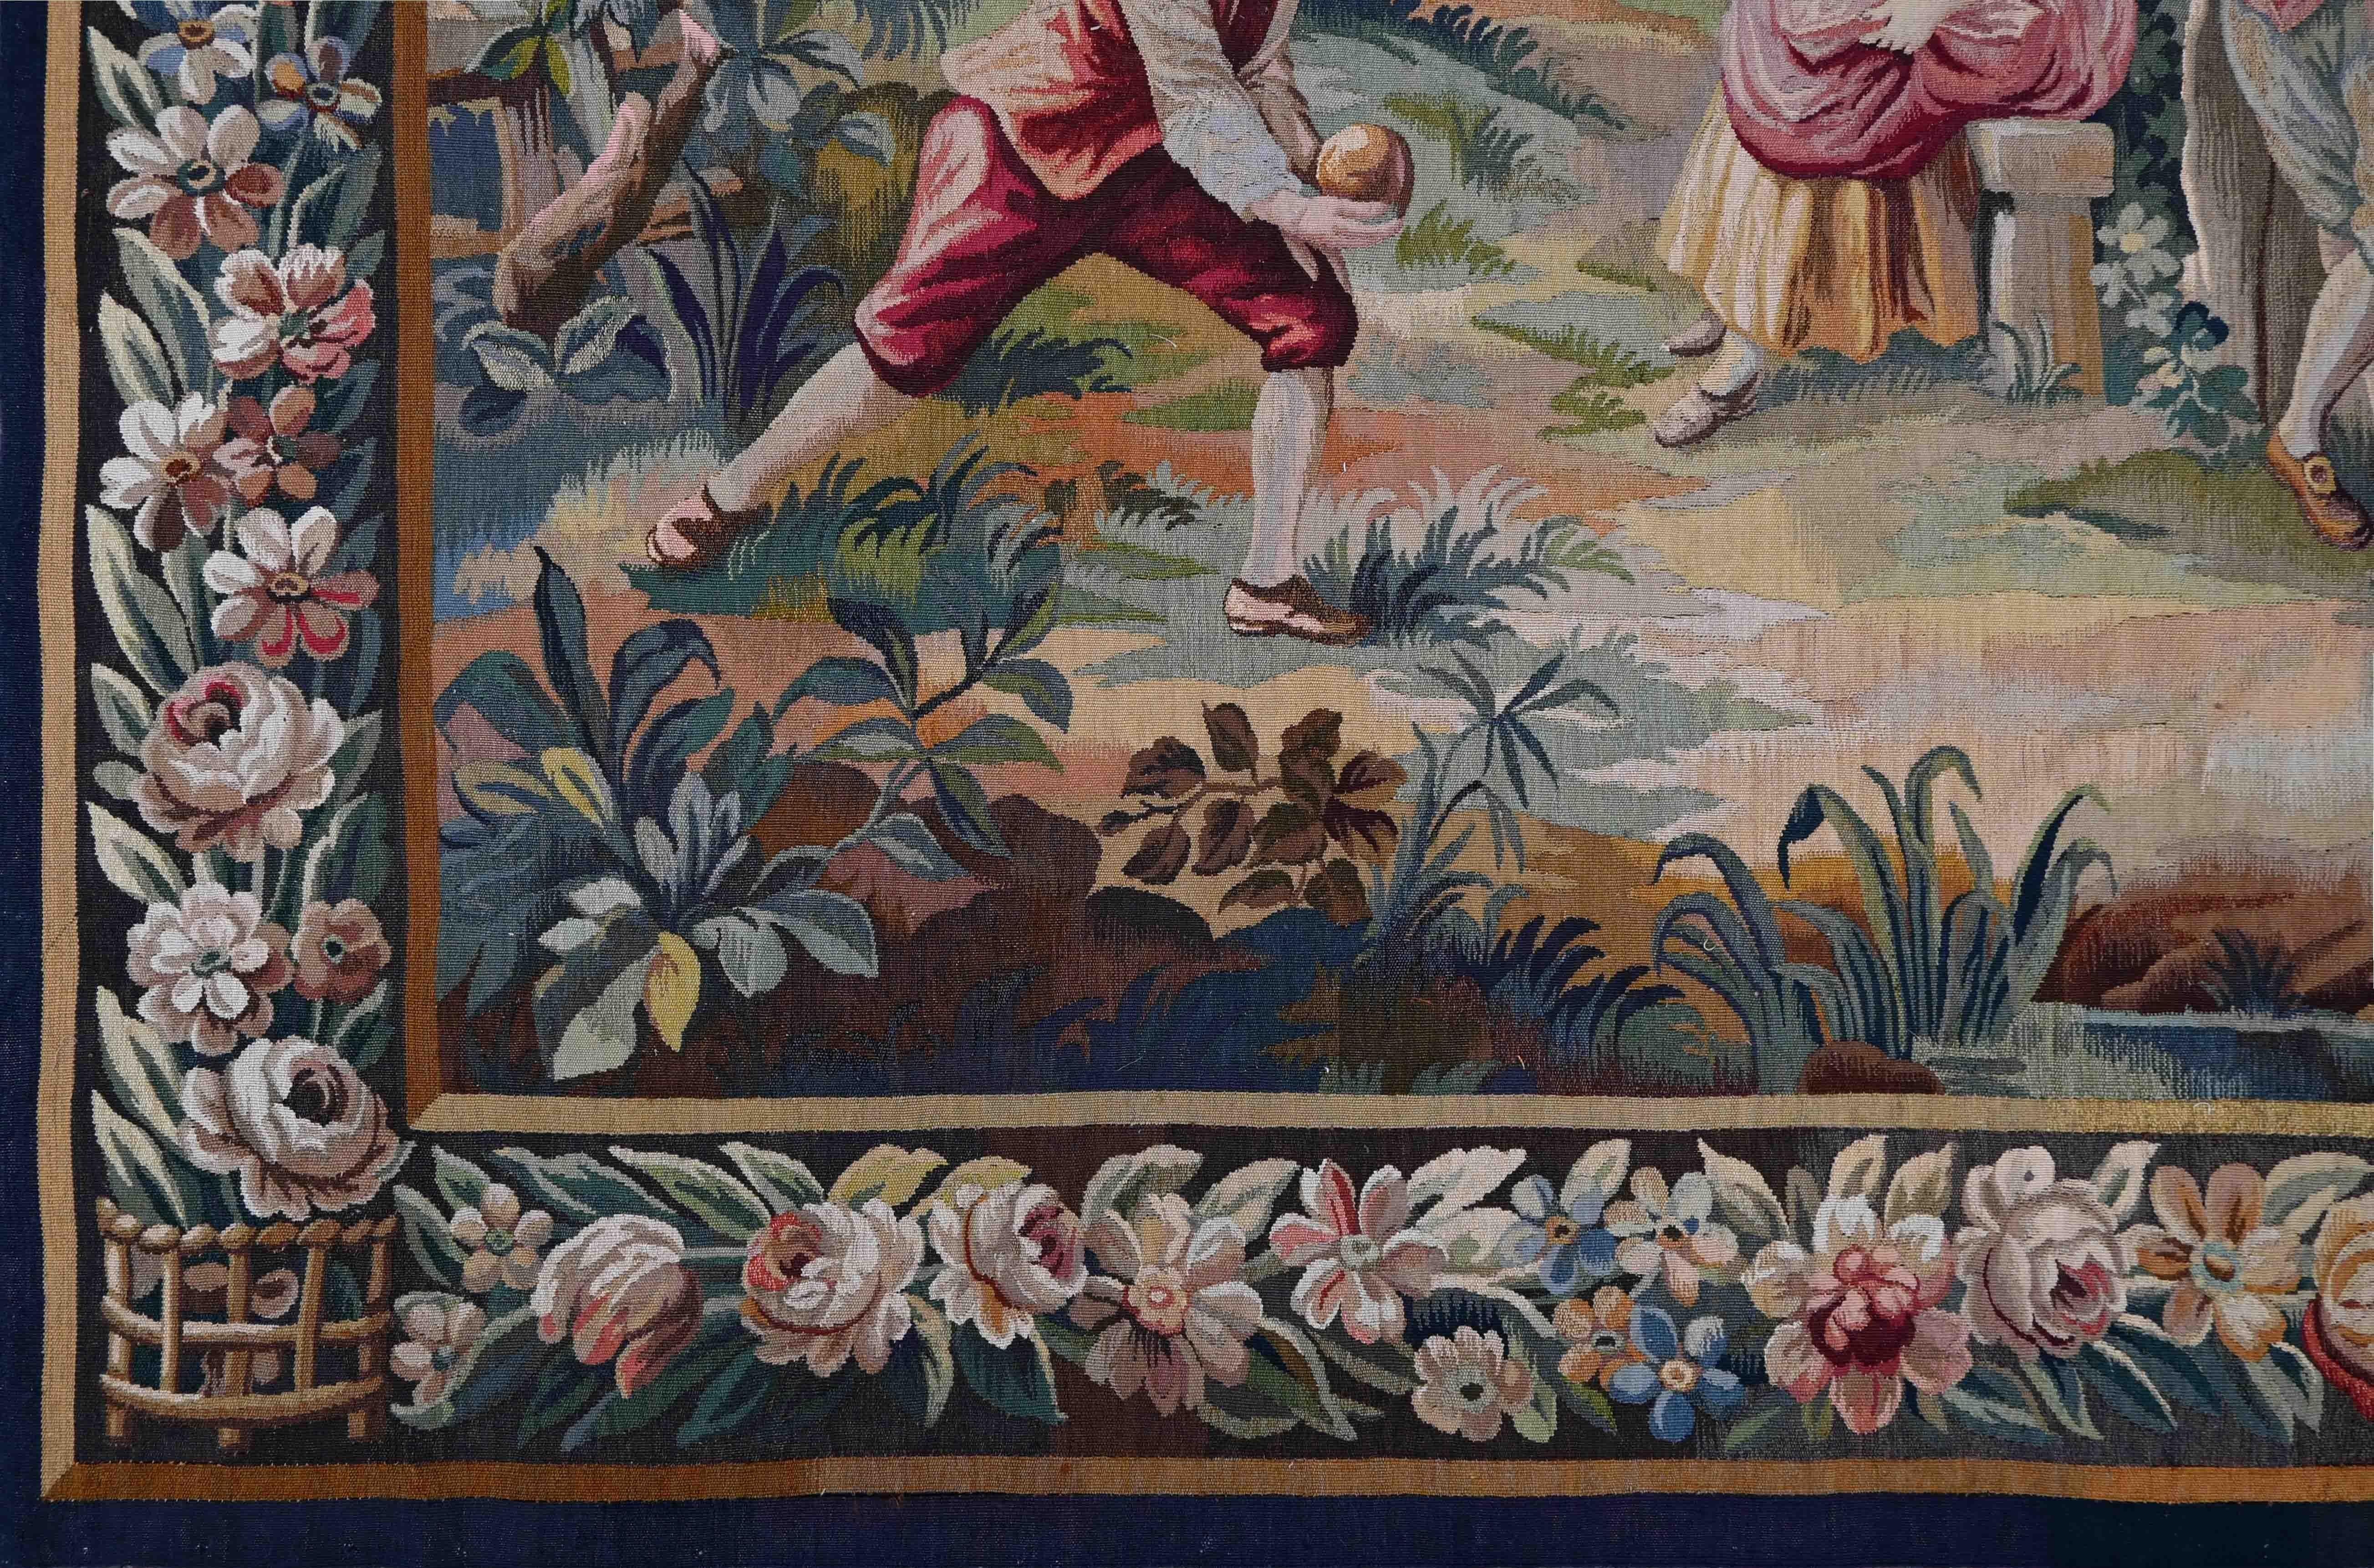 Hand-Woven Aubusson tapestry 19th century petanque game scene - N° 1332 For Sale